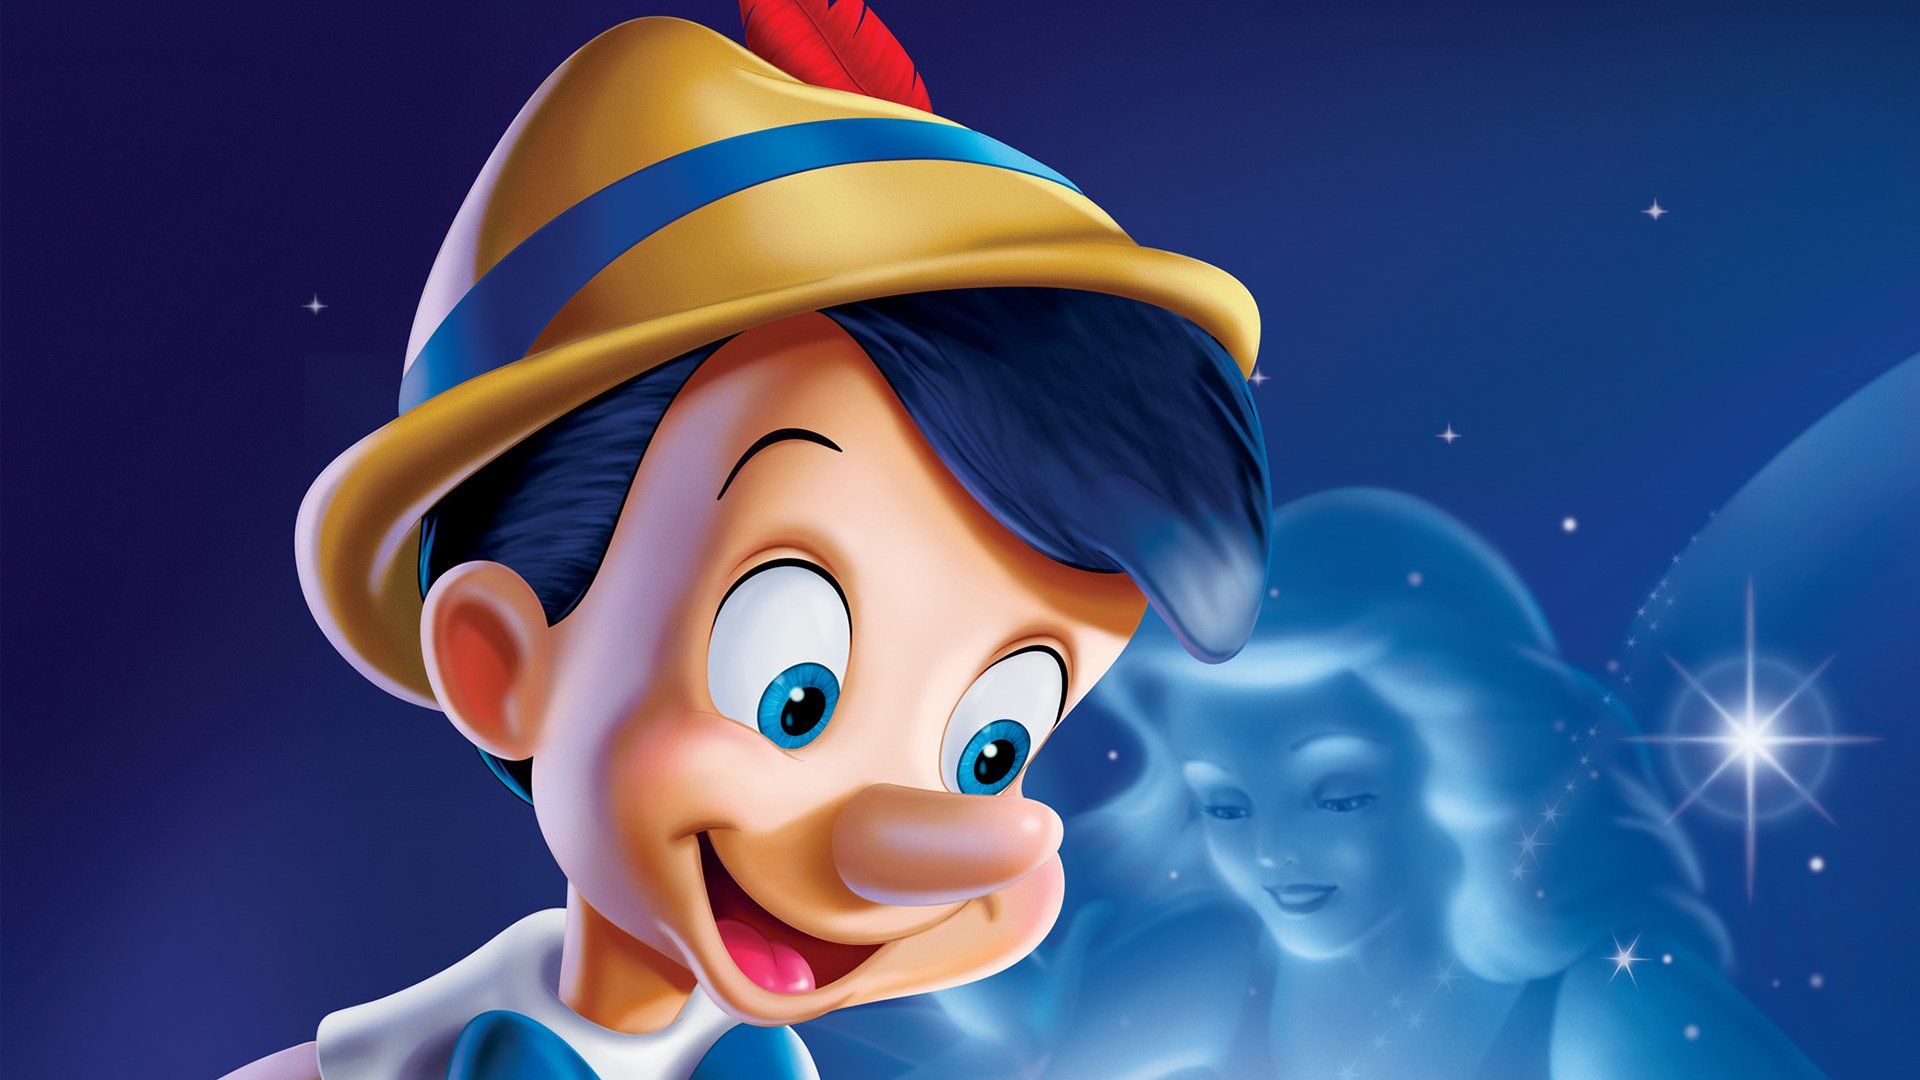 I Bet You Can’t Get 13/18 on This General Knowledge Quiz (feat. Disney) Pinocchio